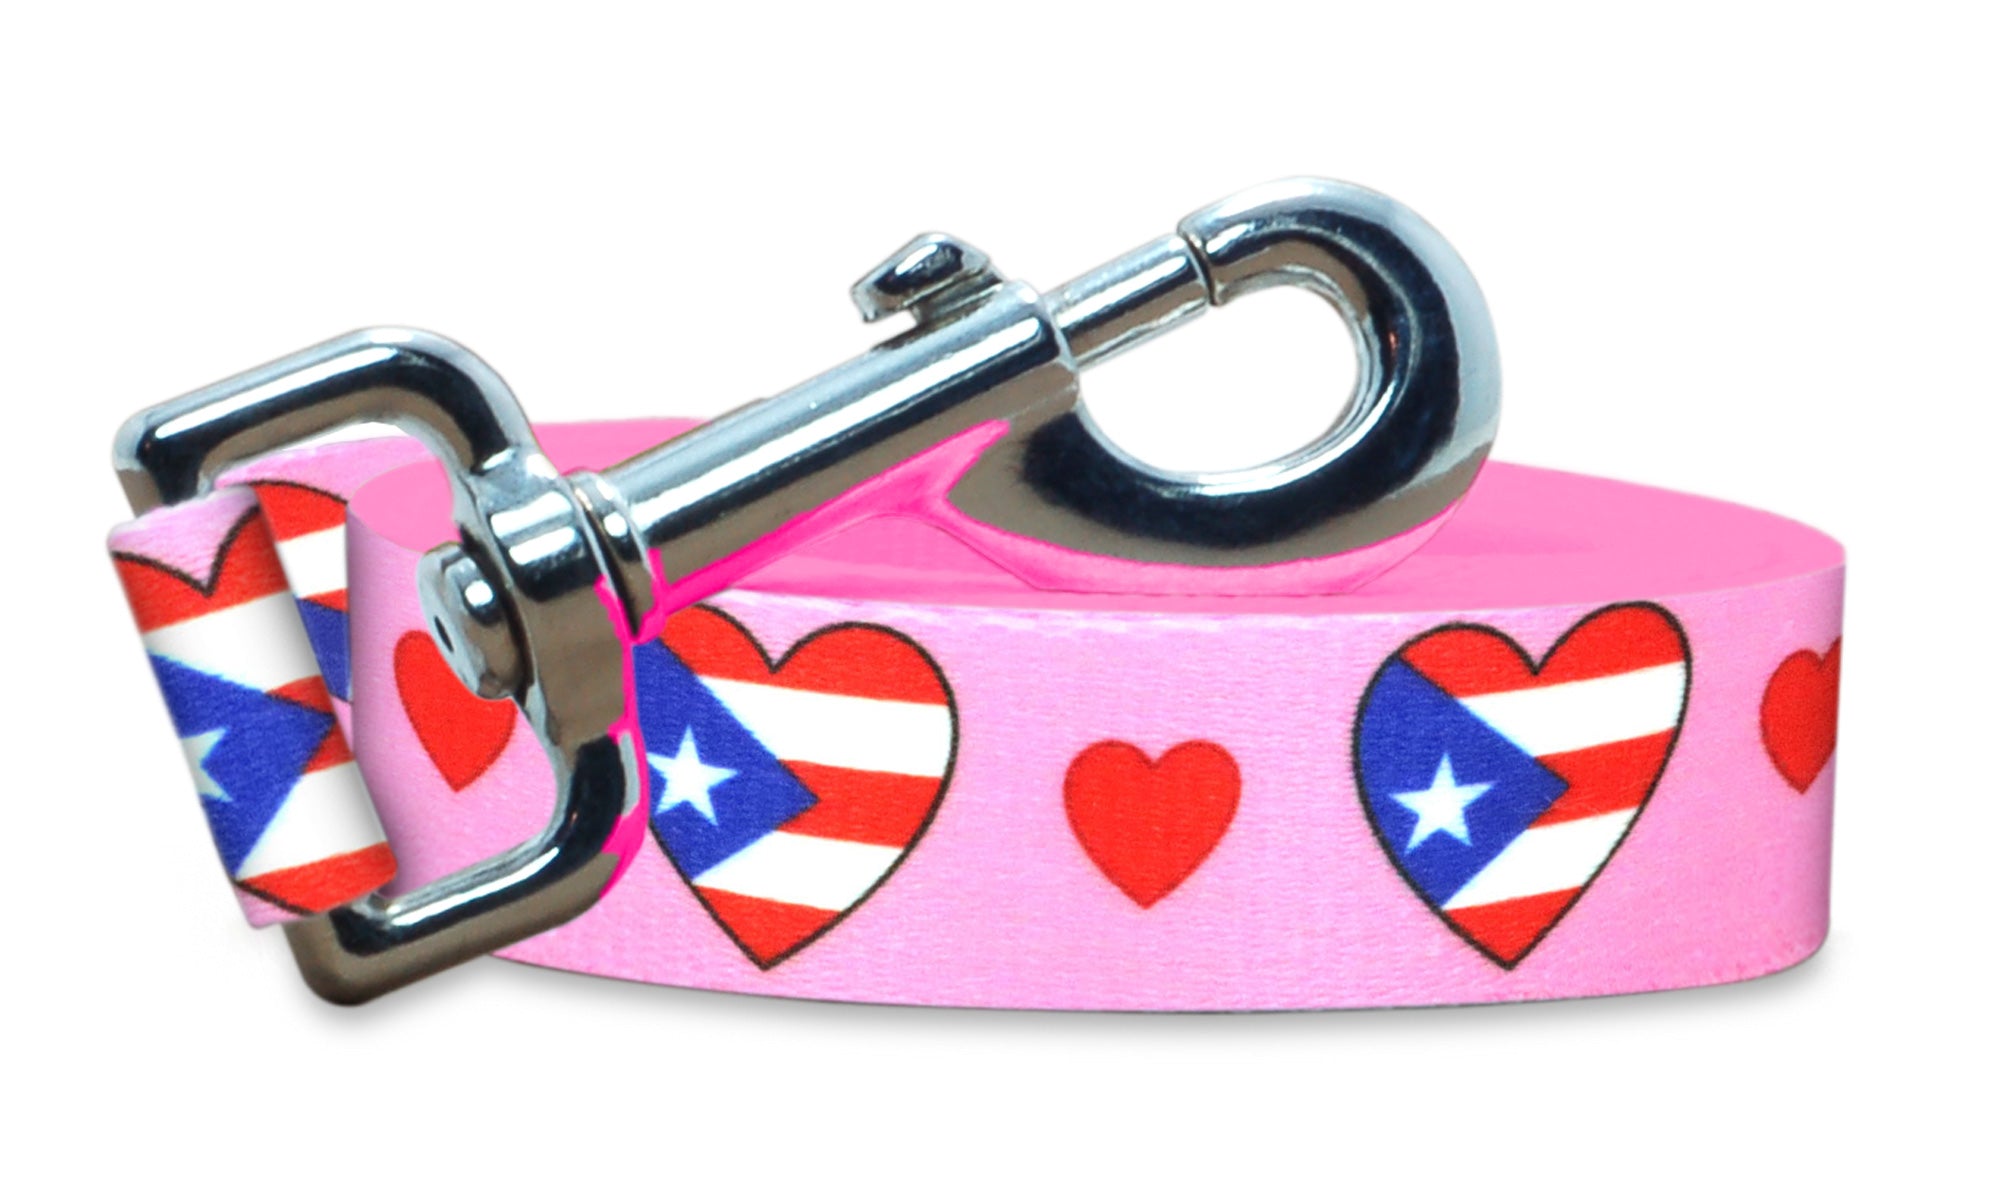 I Love Puerto Rico Dog Leash | 4 Foot and 6 Foot Lengths